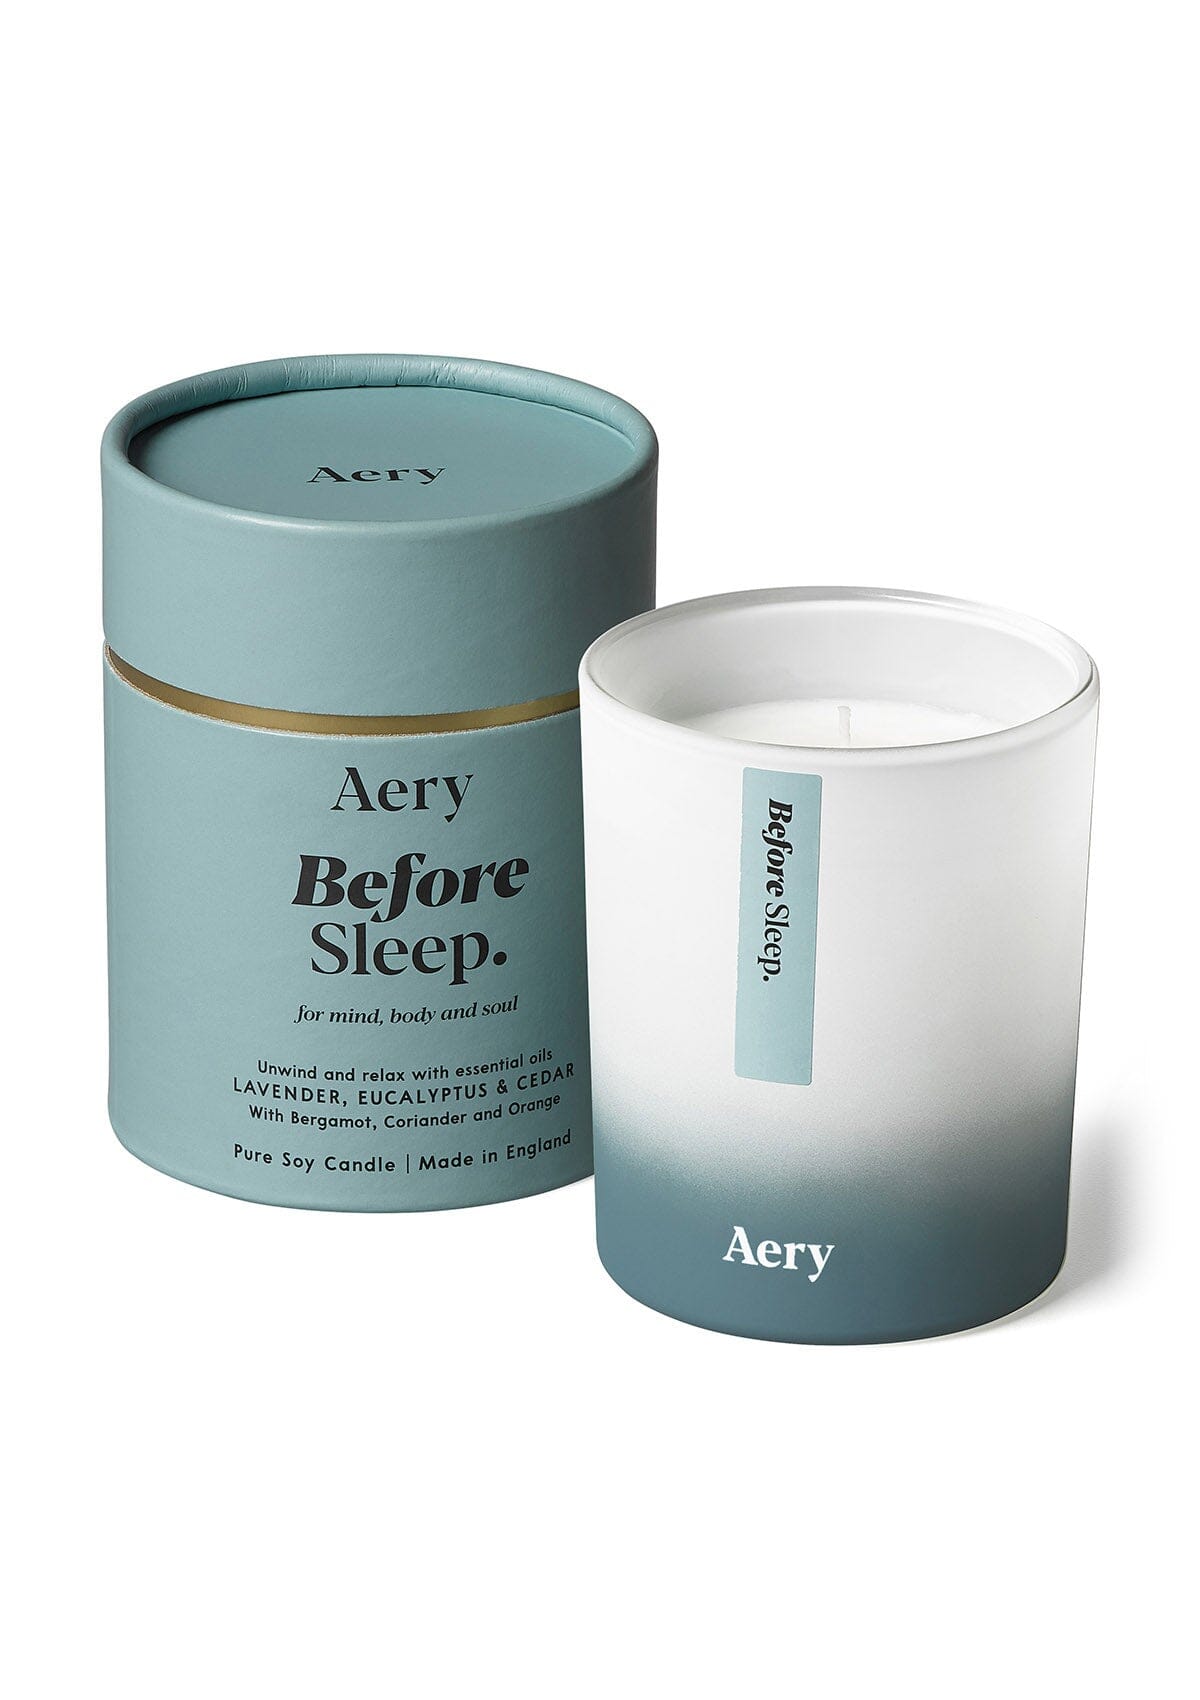 pale blue before sleep scented candle with product packaging by Aery 